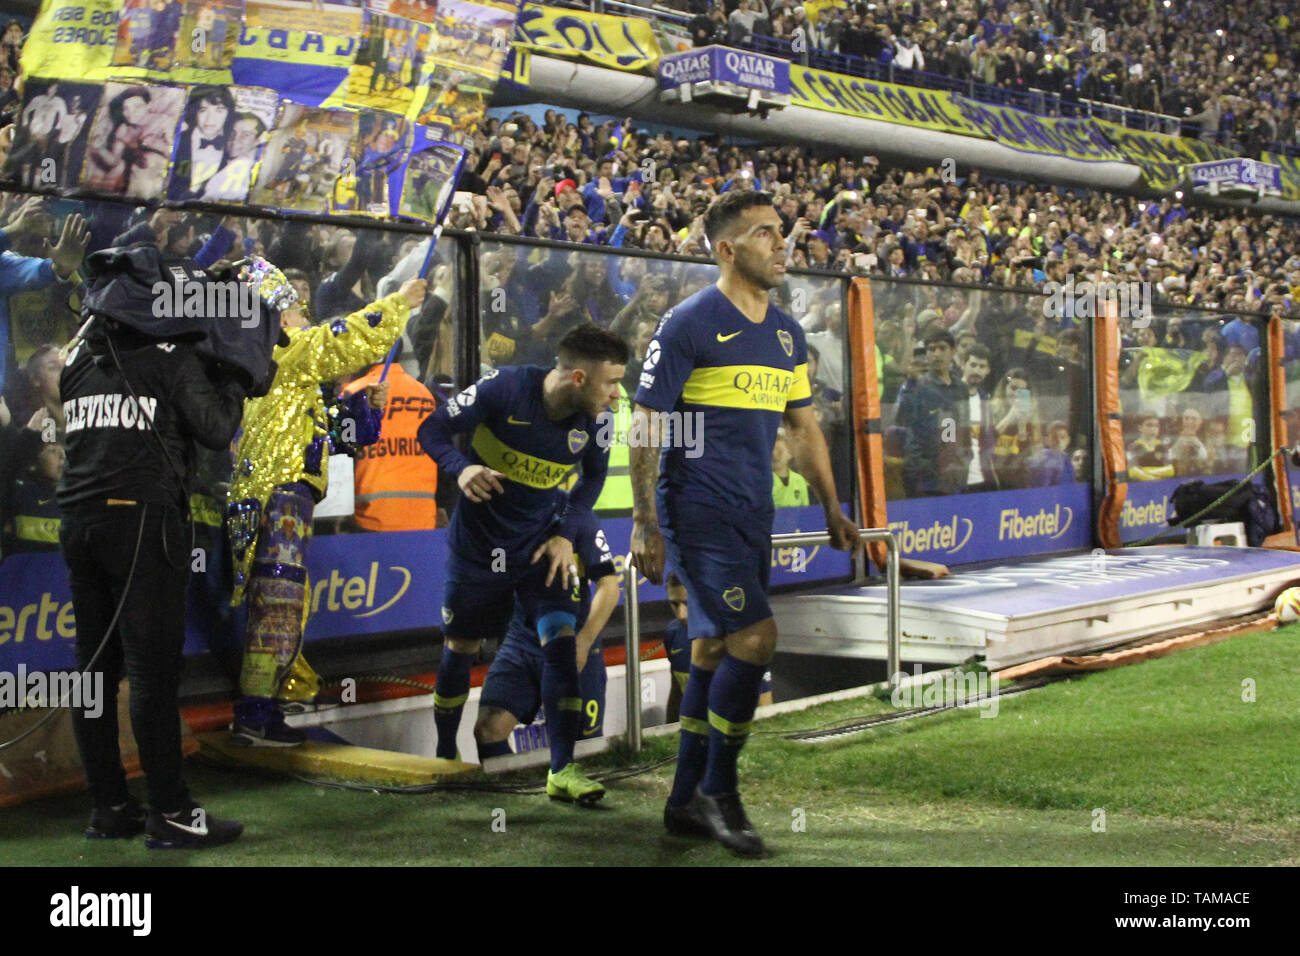 BUENOS AIRES, 26.05.2019: Team of Boca Juniors coming to the match between Boca Juniors and Argentinos Juniors and for semifinal match of Copa Superli Stock Photo